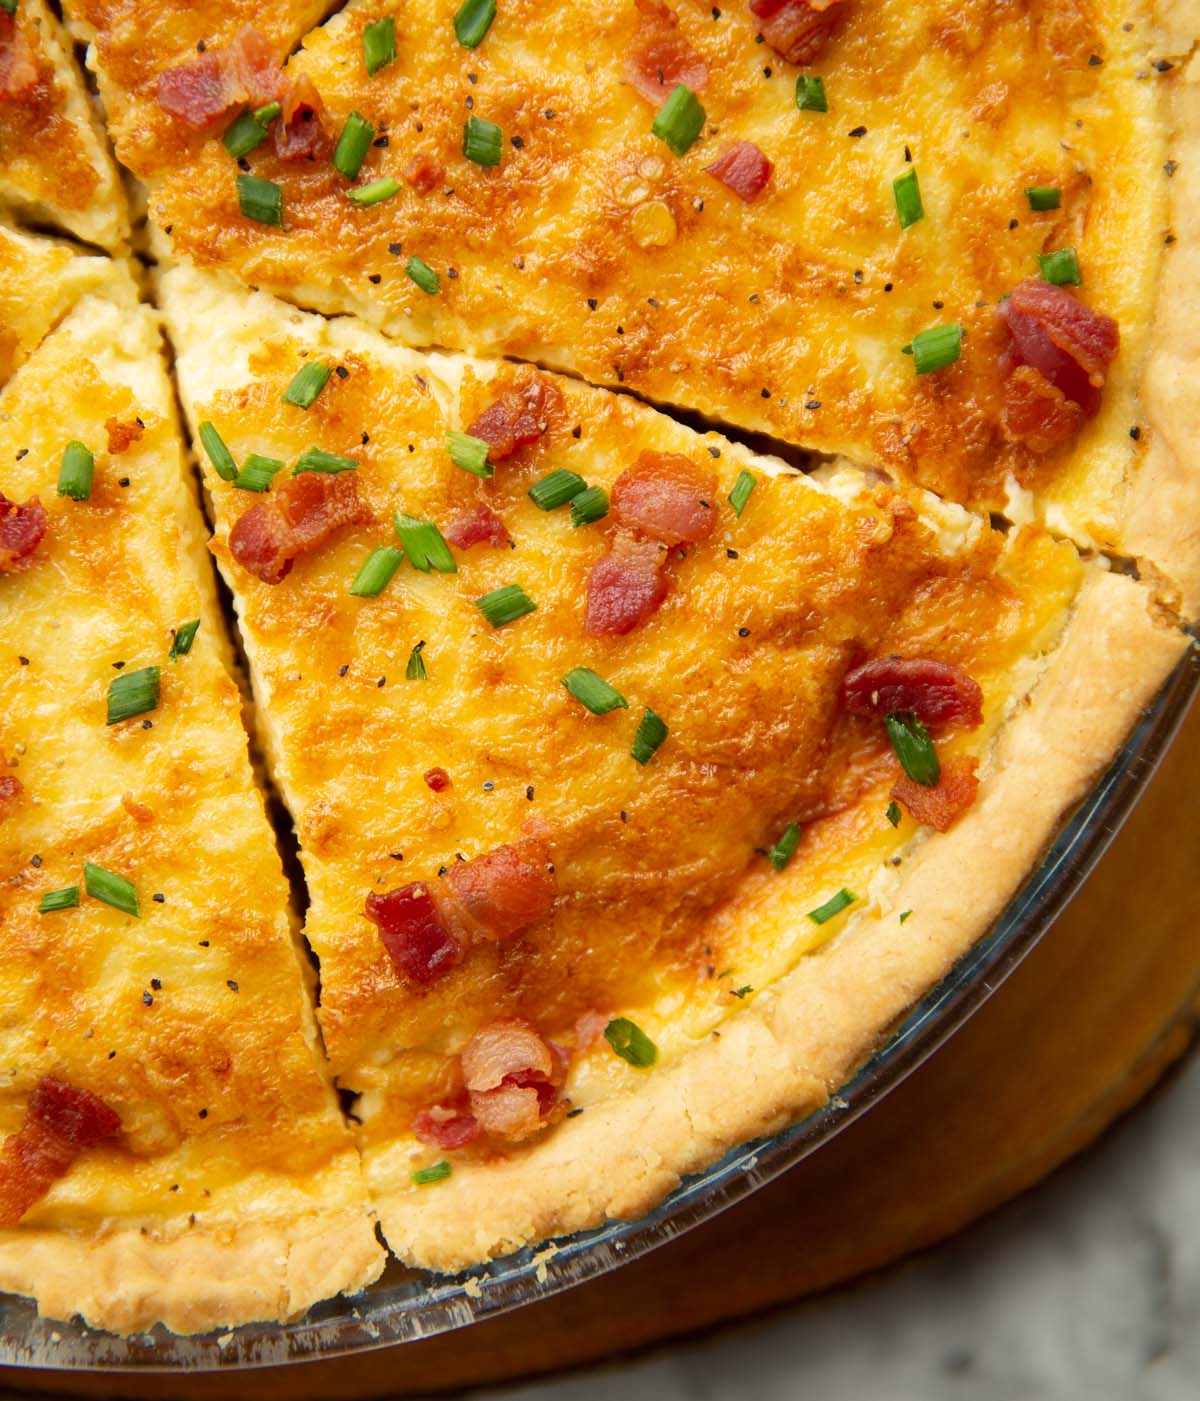 Incredibly Delicious Quiche Lorraine | Don't Go Bacon My Heart